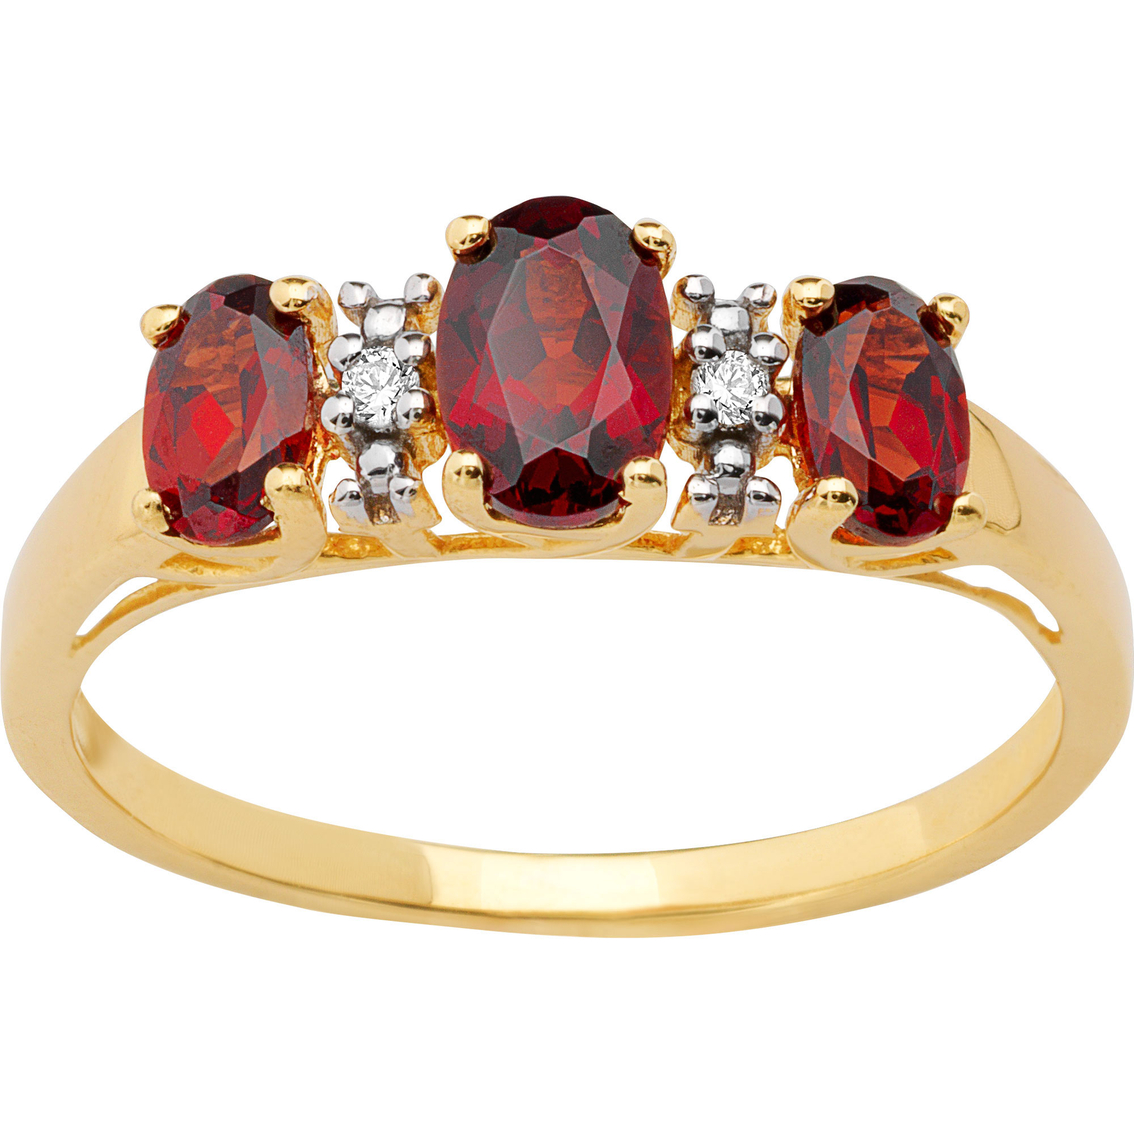 10k Yellow Gold 3 Stone Garnet Ring With Diamond Accents Size 7